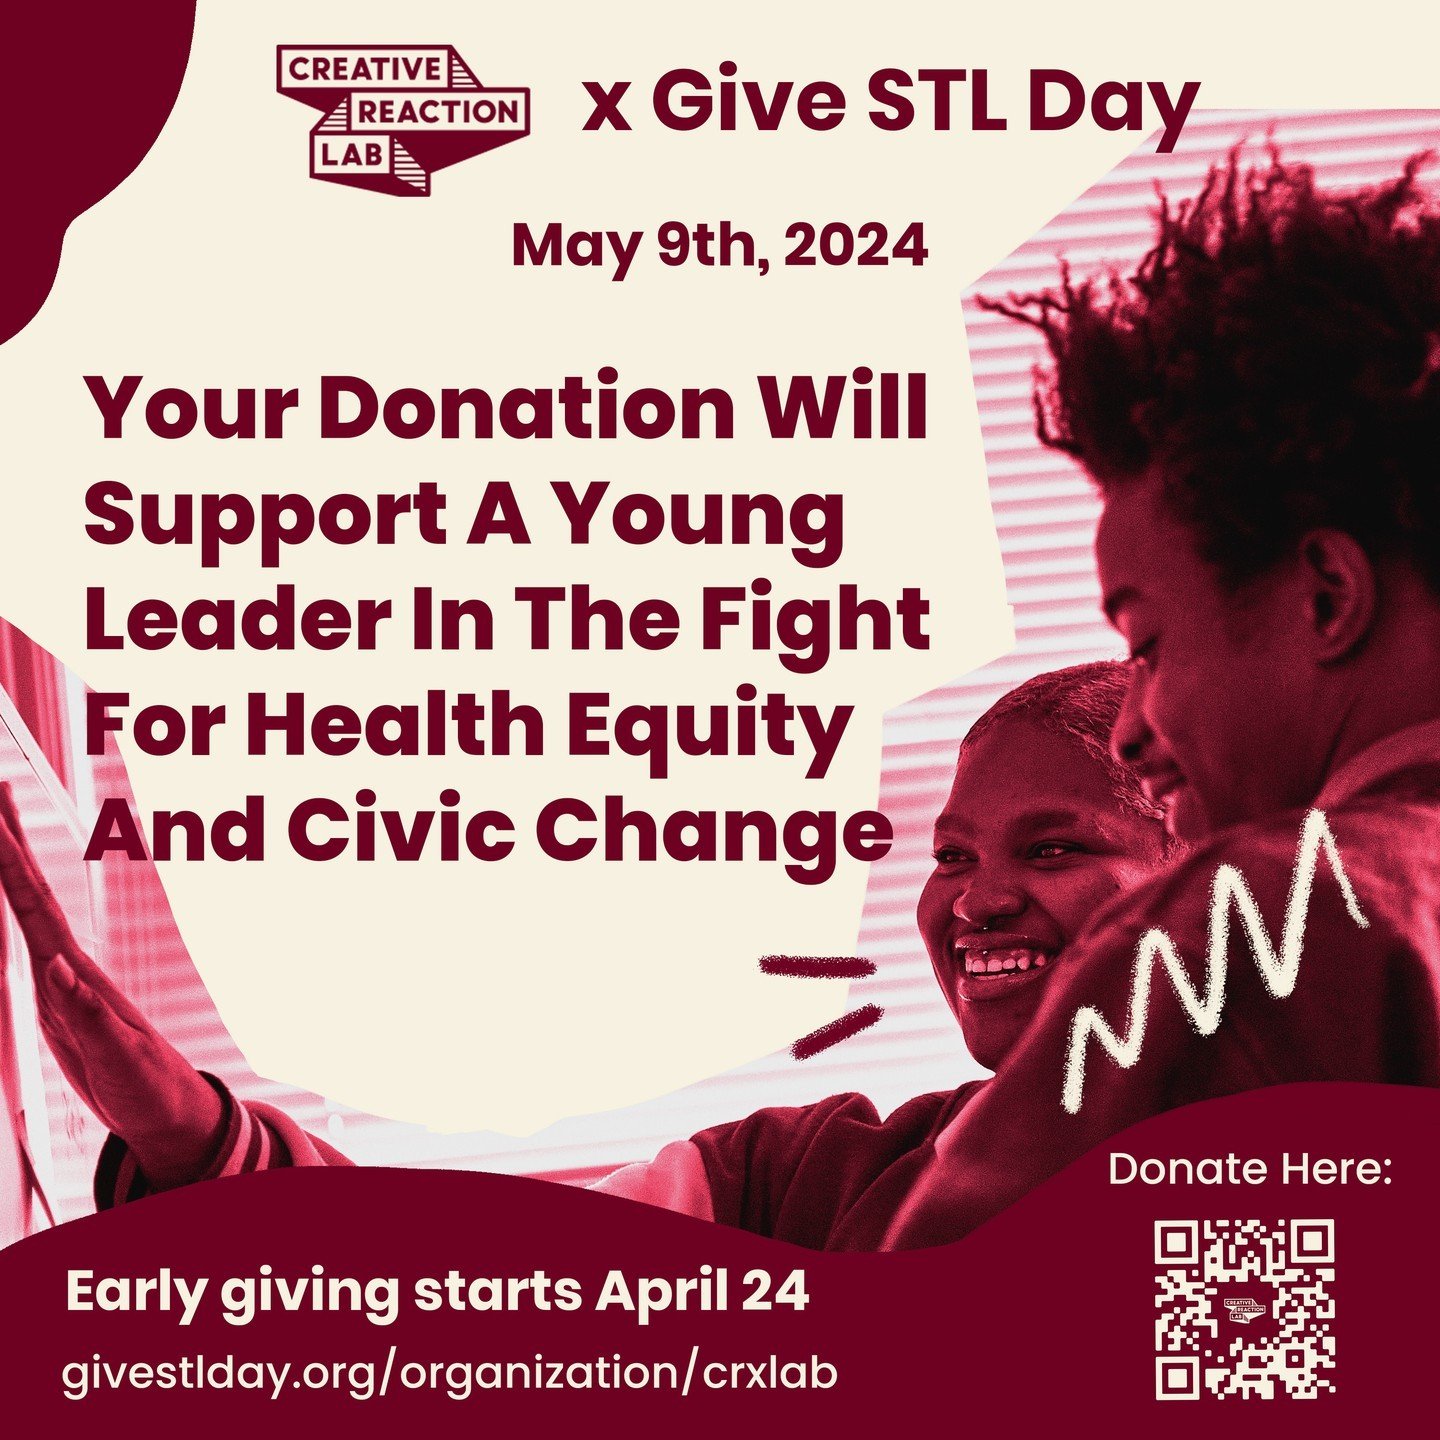 The countdown begins! 

With just 9 days left until Give STL Day, we're gearing up for an incredible day of giving and impact. Together, let's empower young leaders to be the change they wish to see in the world. Join us on May 9th and make a differe